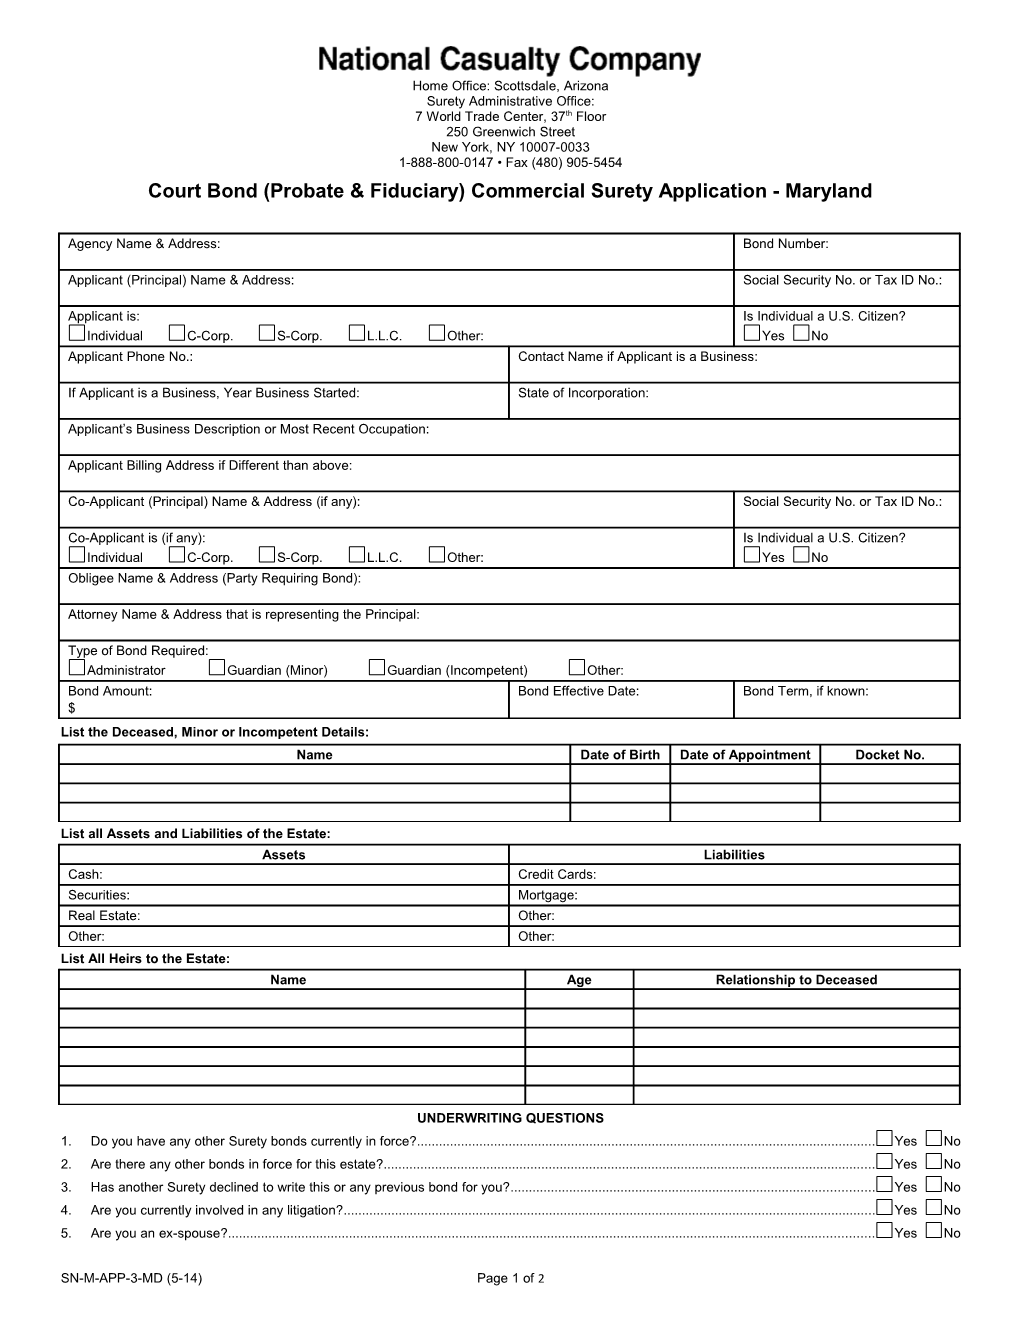 Court Bond (Probate & Fiduciary) Commercial Surety Application